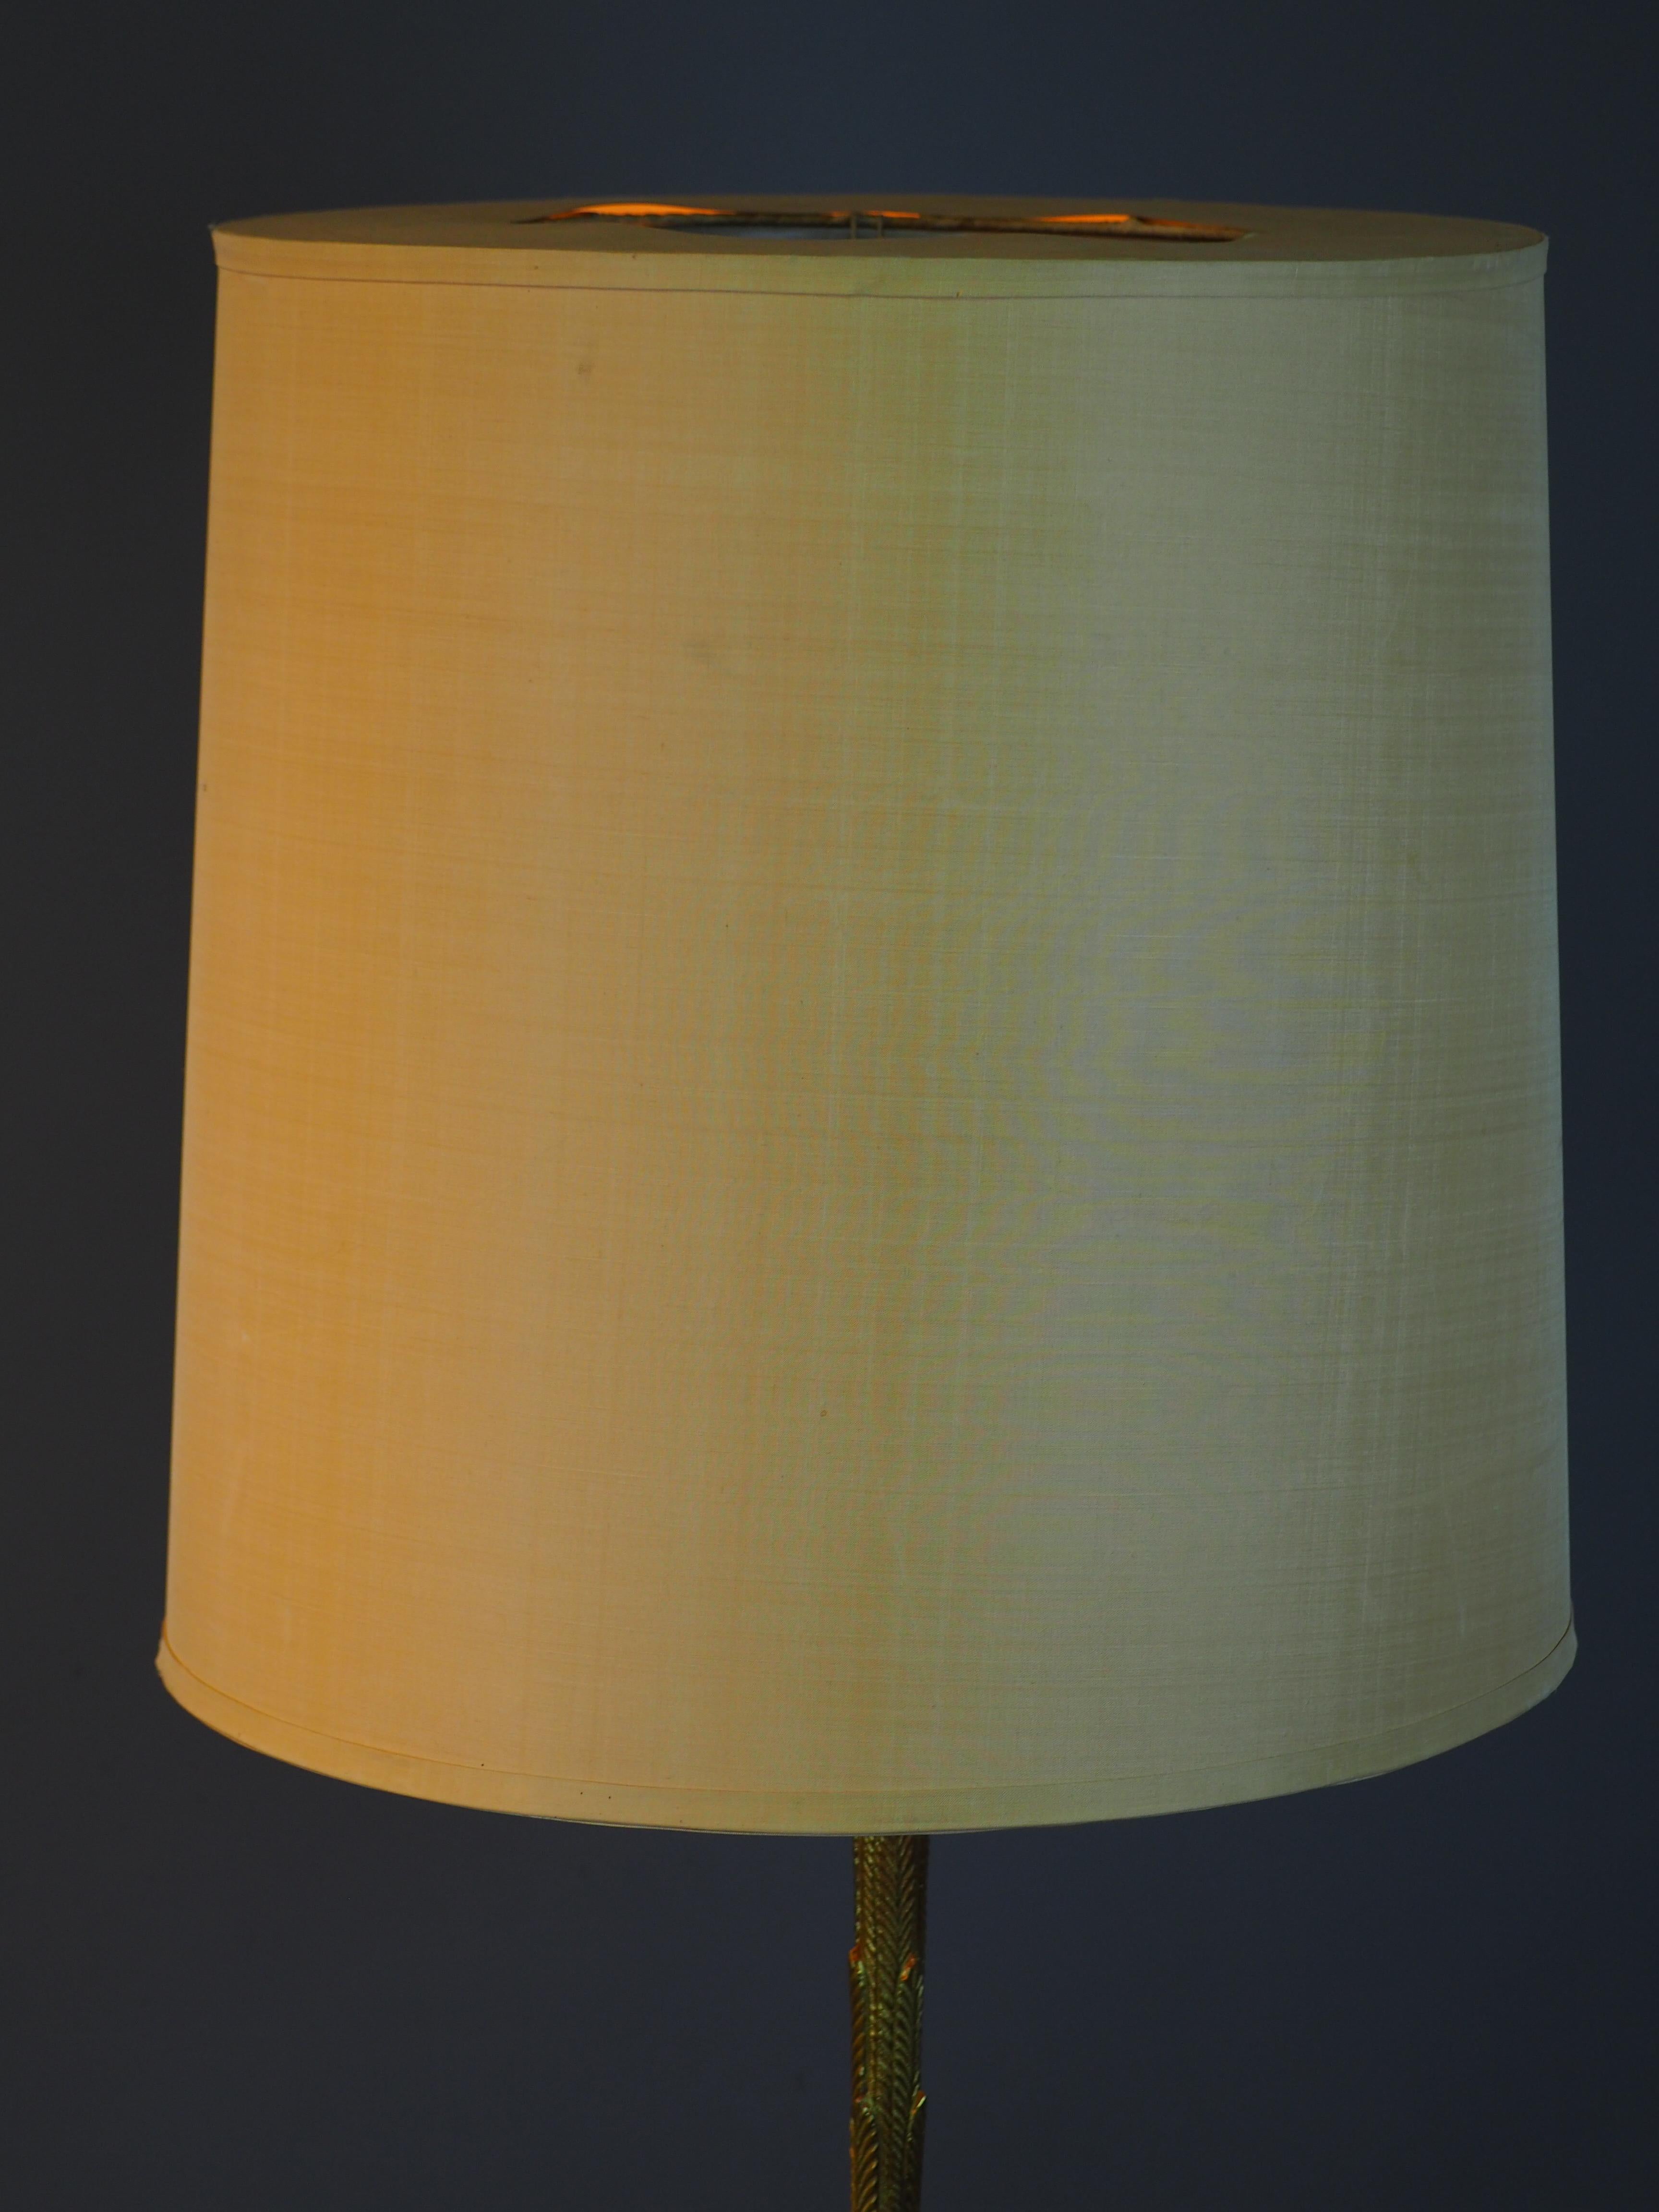 French Gilt Bronze Floor Lamp by Maison Baguès, circa 1950s For Sale 5